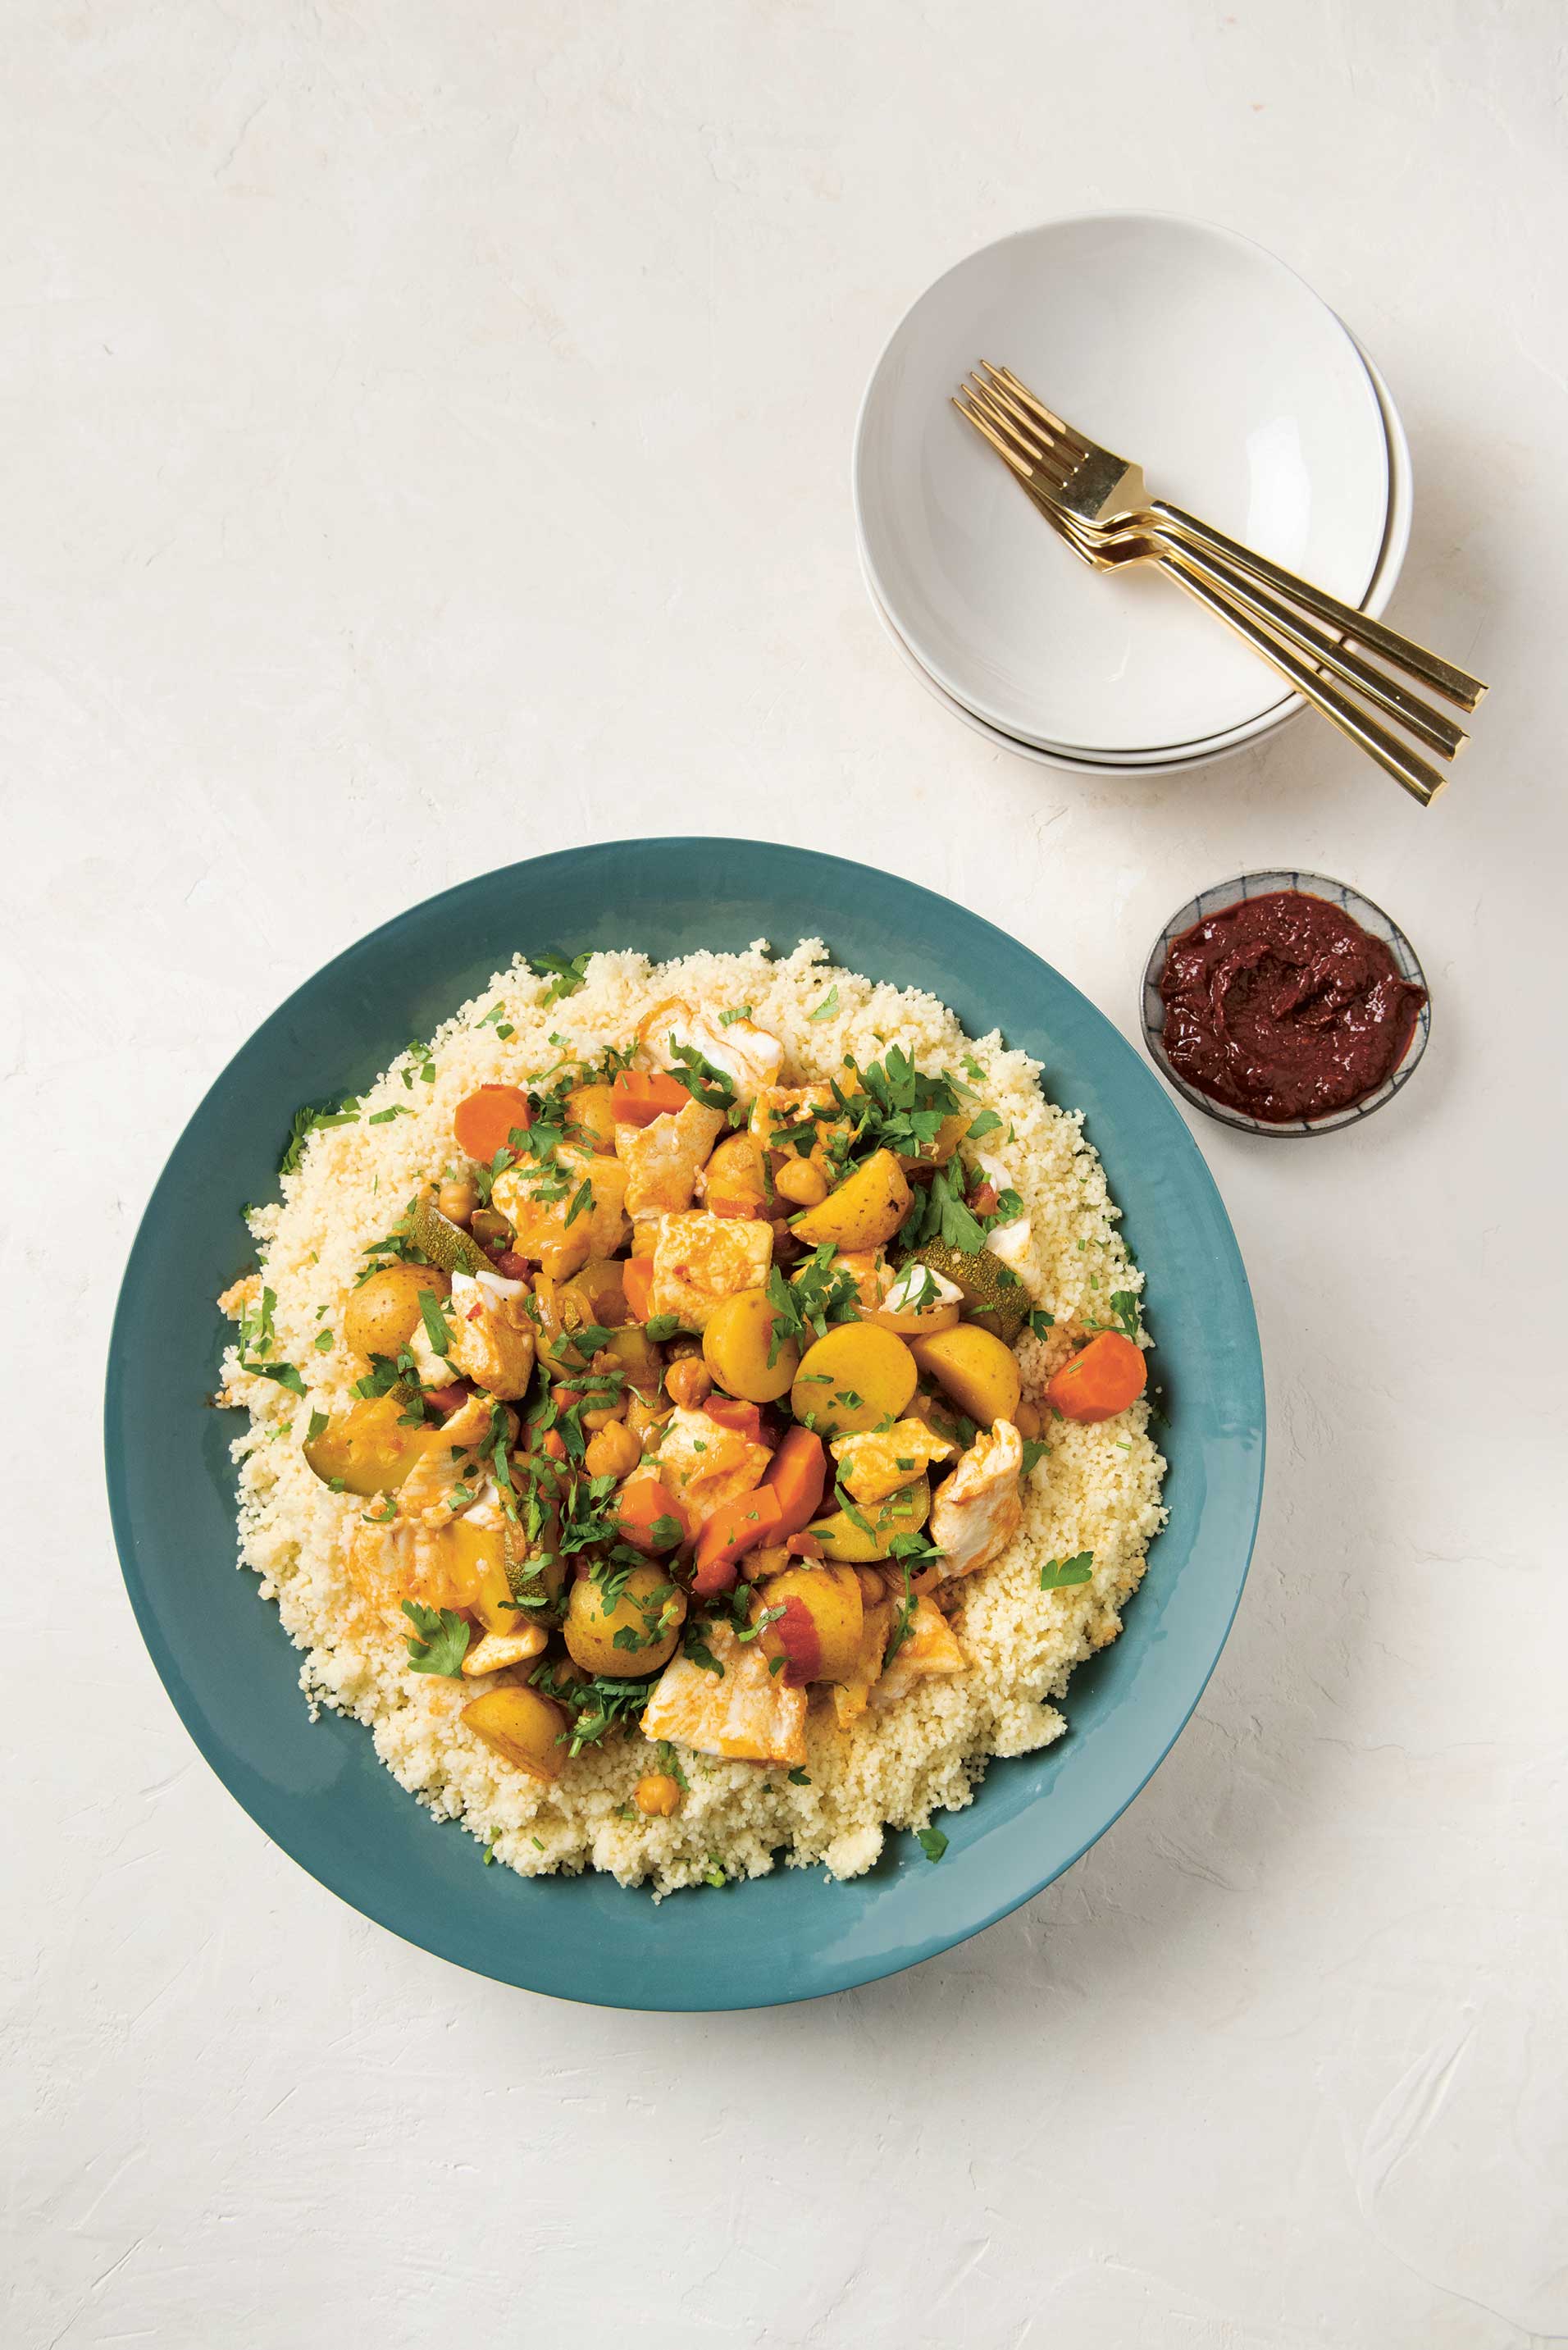 Fish Tagine Couscous from The Jewish Cookbook